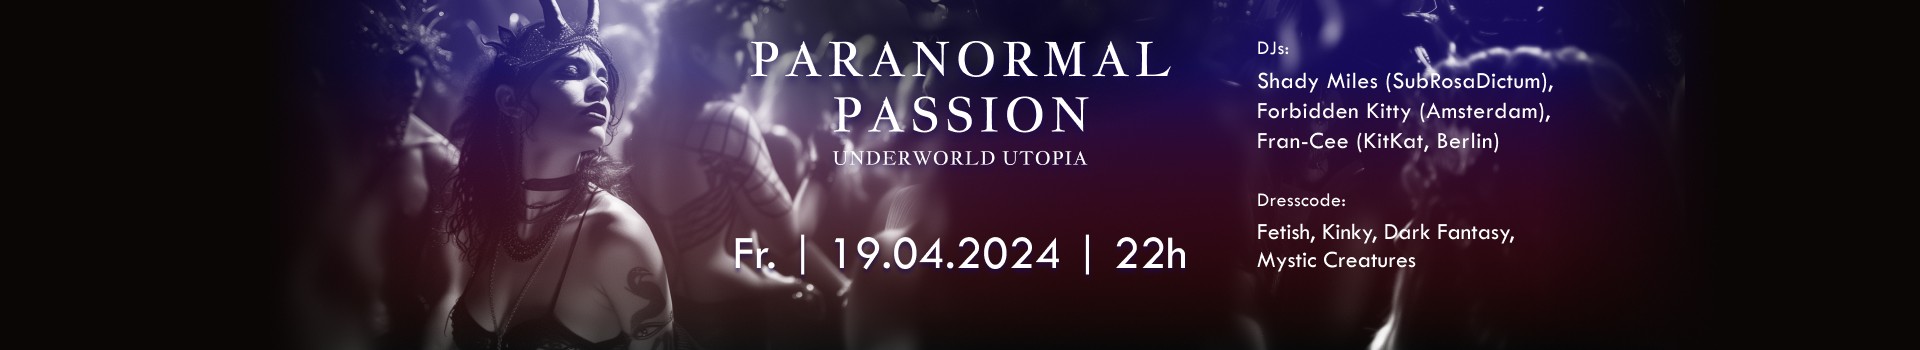 Paranormal Passion